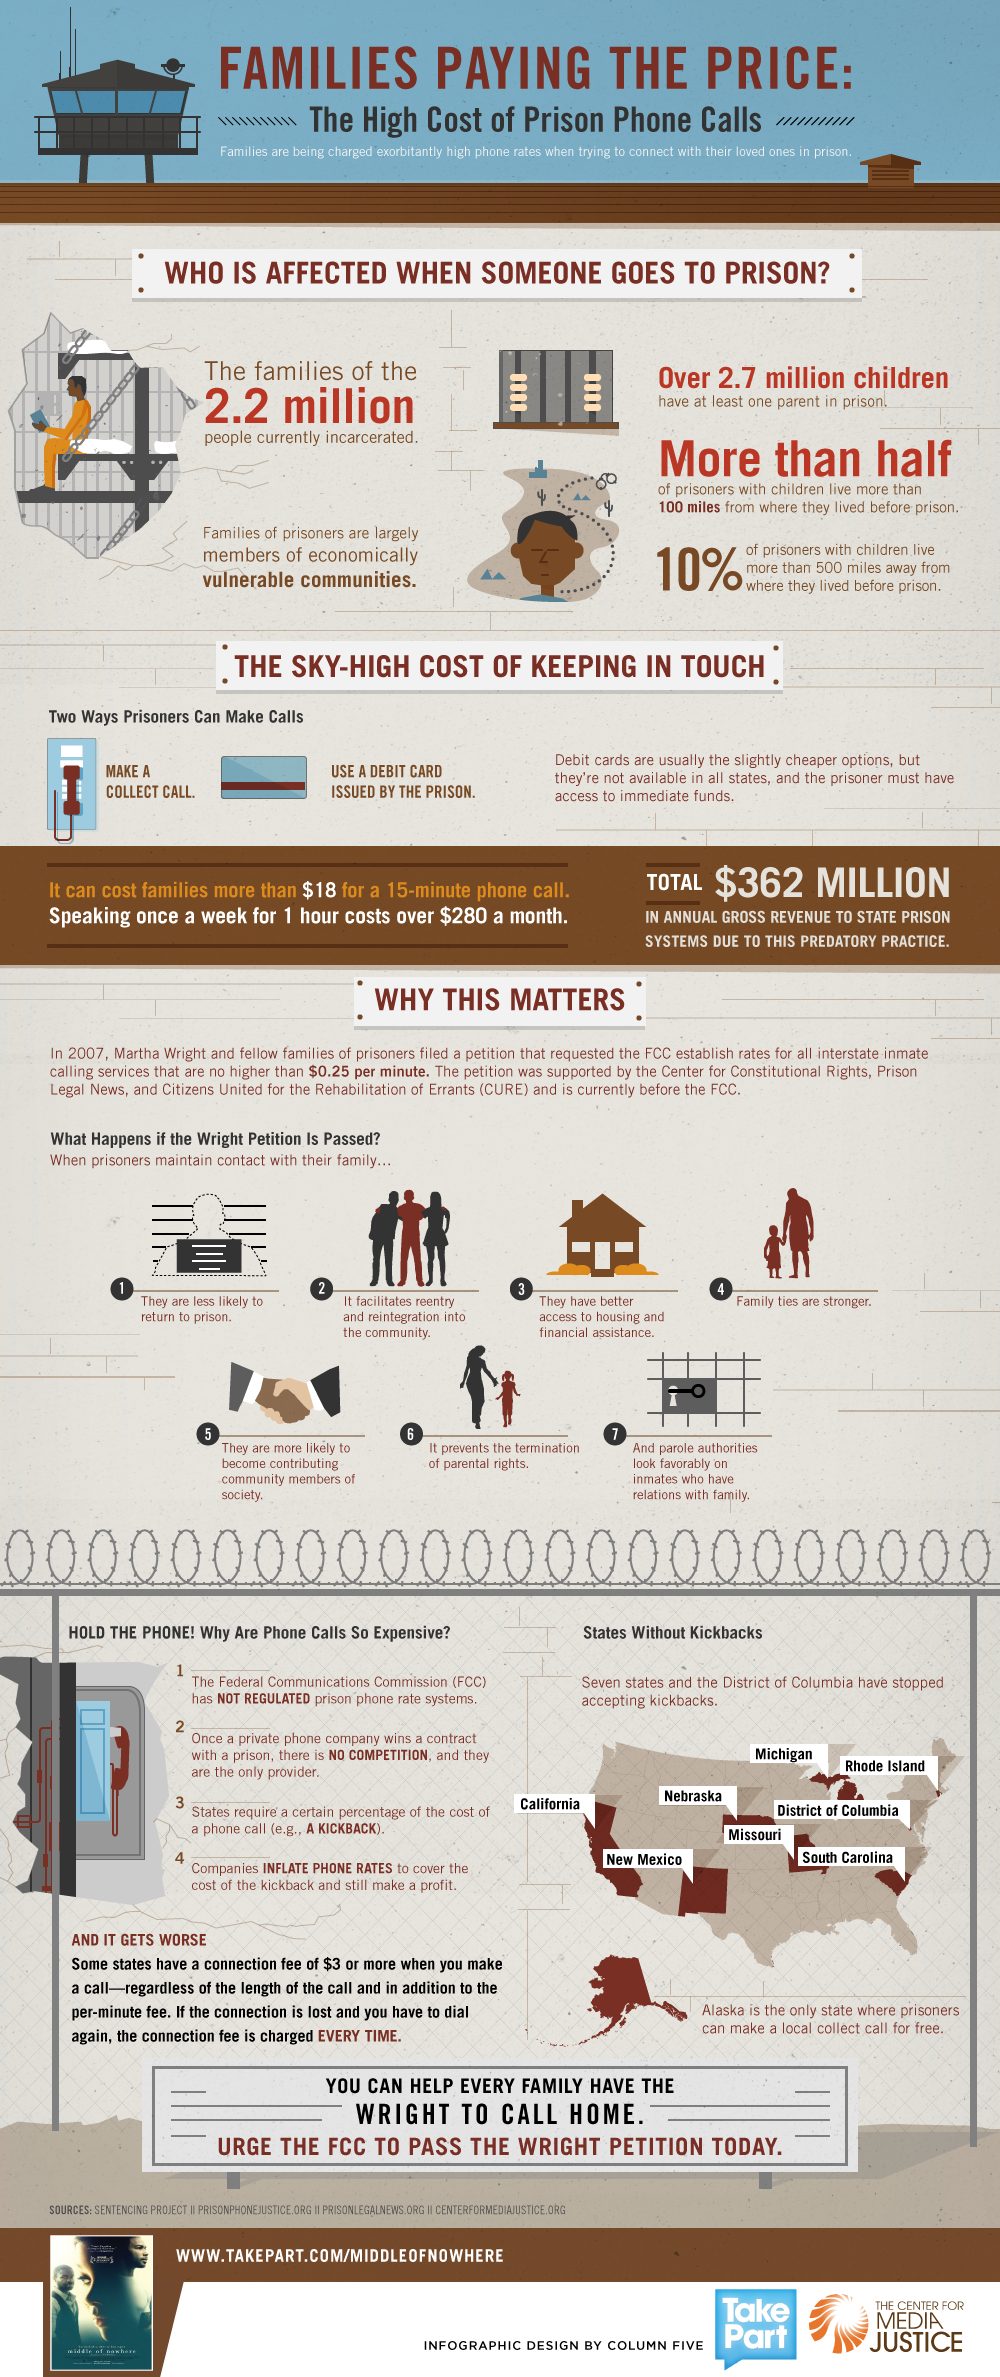 The High Cost of Prison Phone Calls: A TakePart Infographic